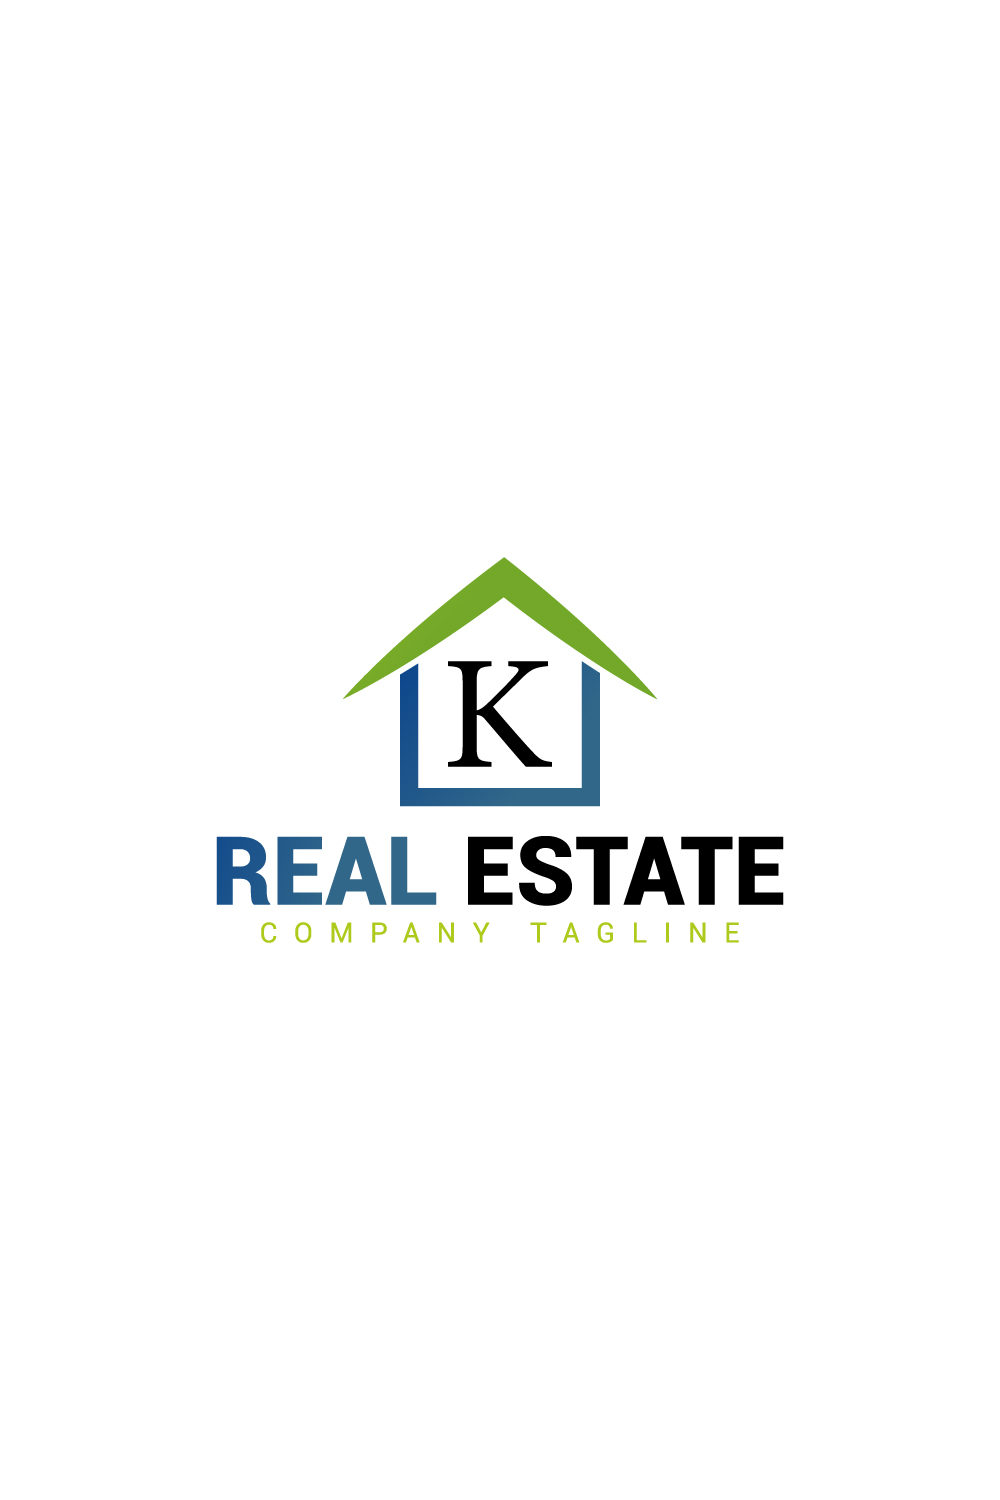 Real estate logo with green, dark blue color and K letter pinterest preview image.